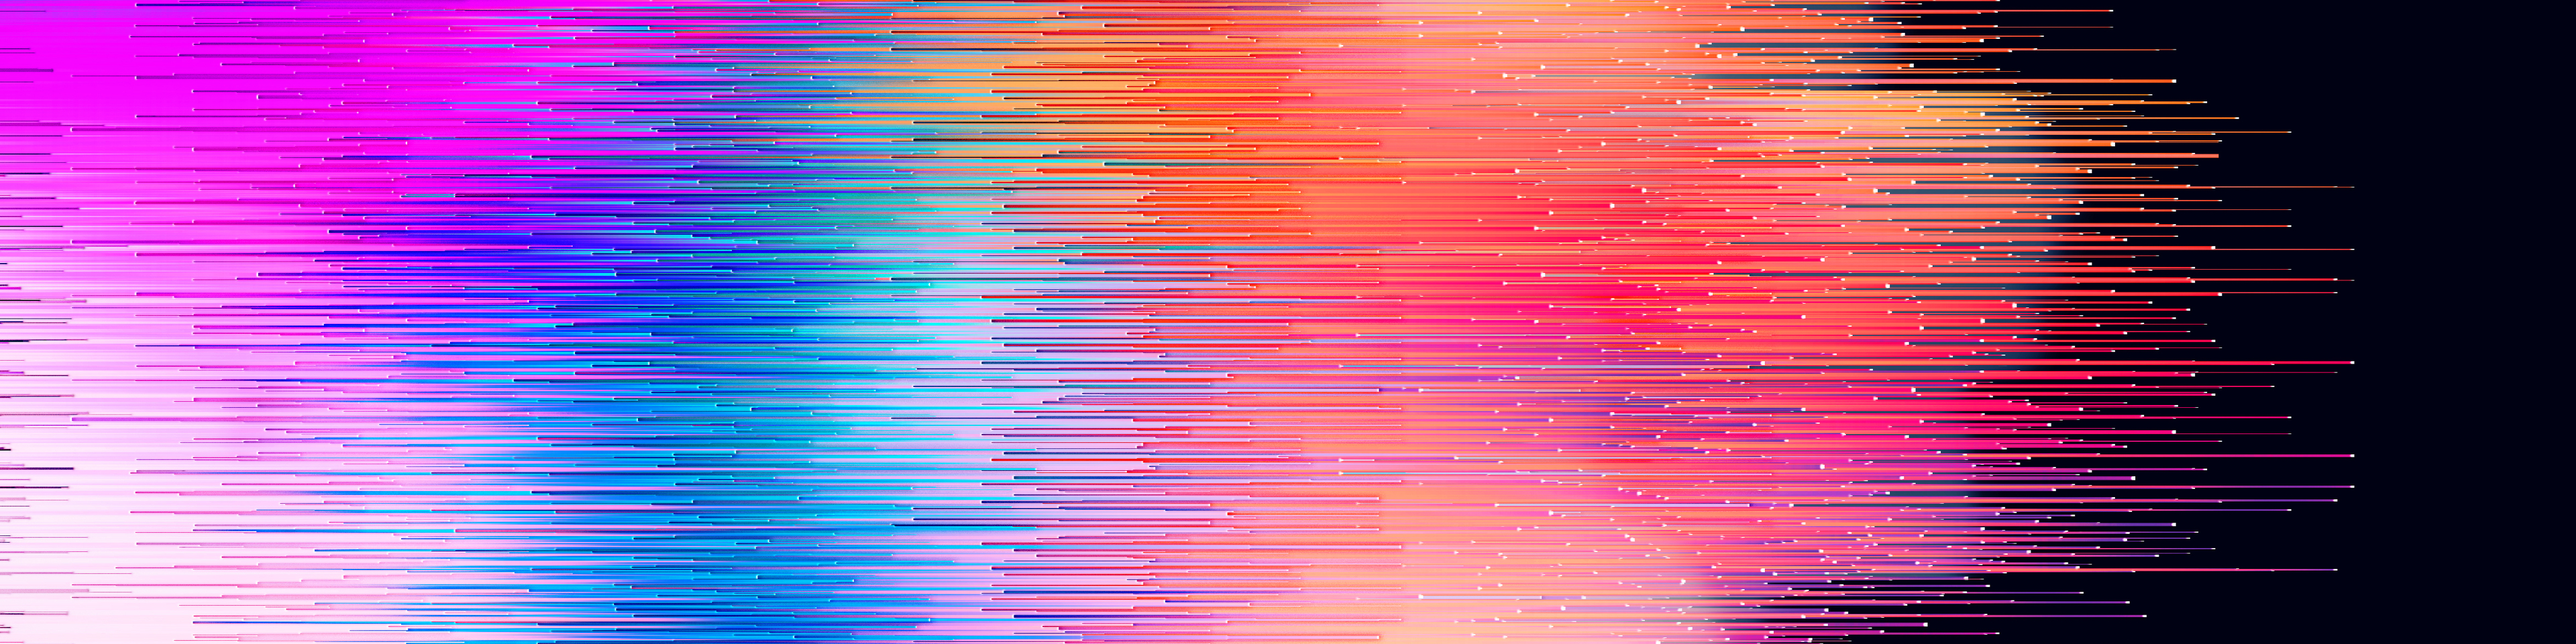 Digital Glitch Art Abstract Background Graphic Element Distorted Texture Geometric Extrude Horizontal Lines 